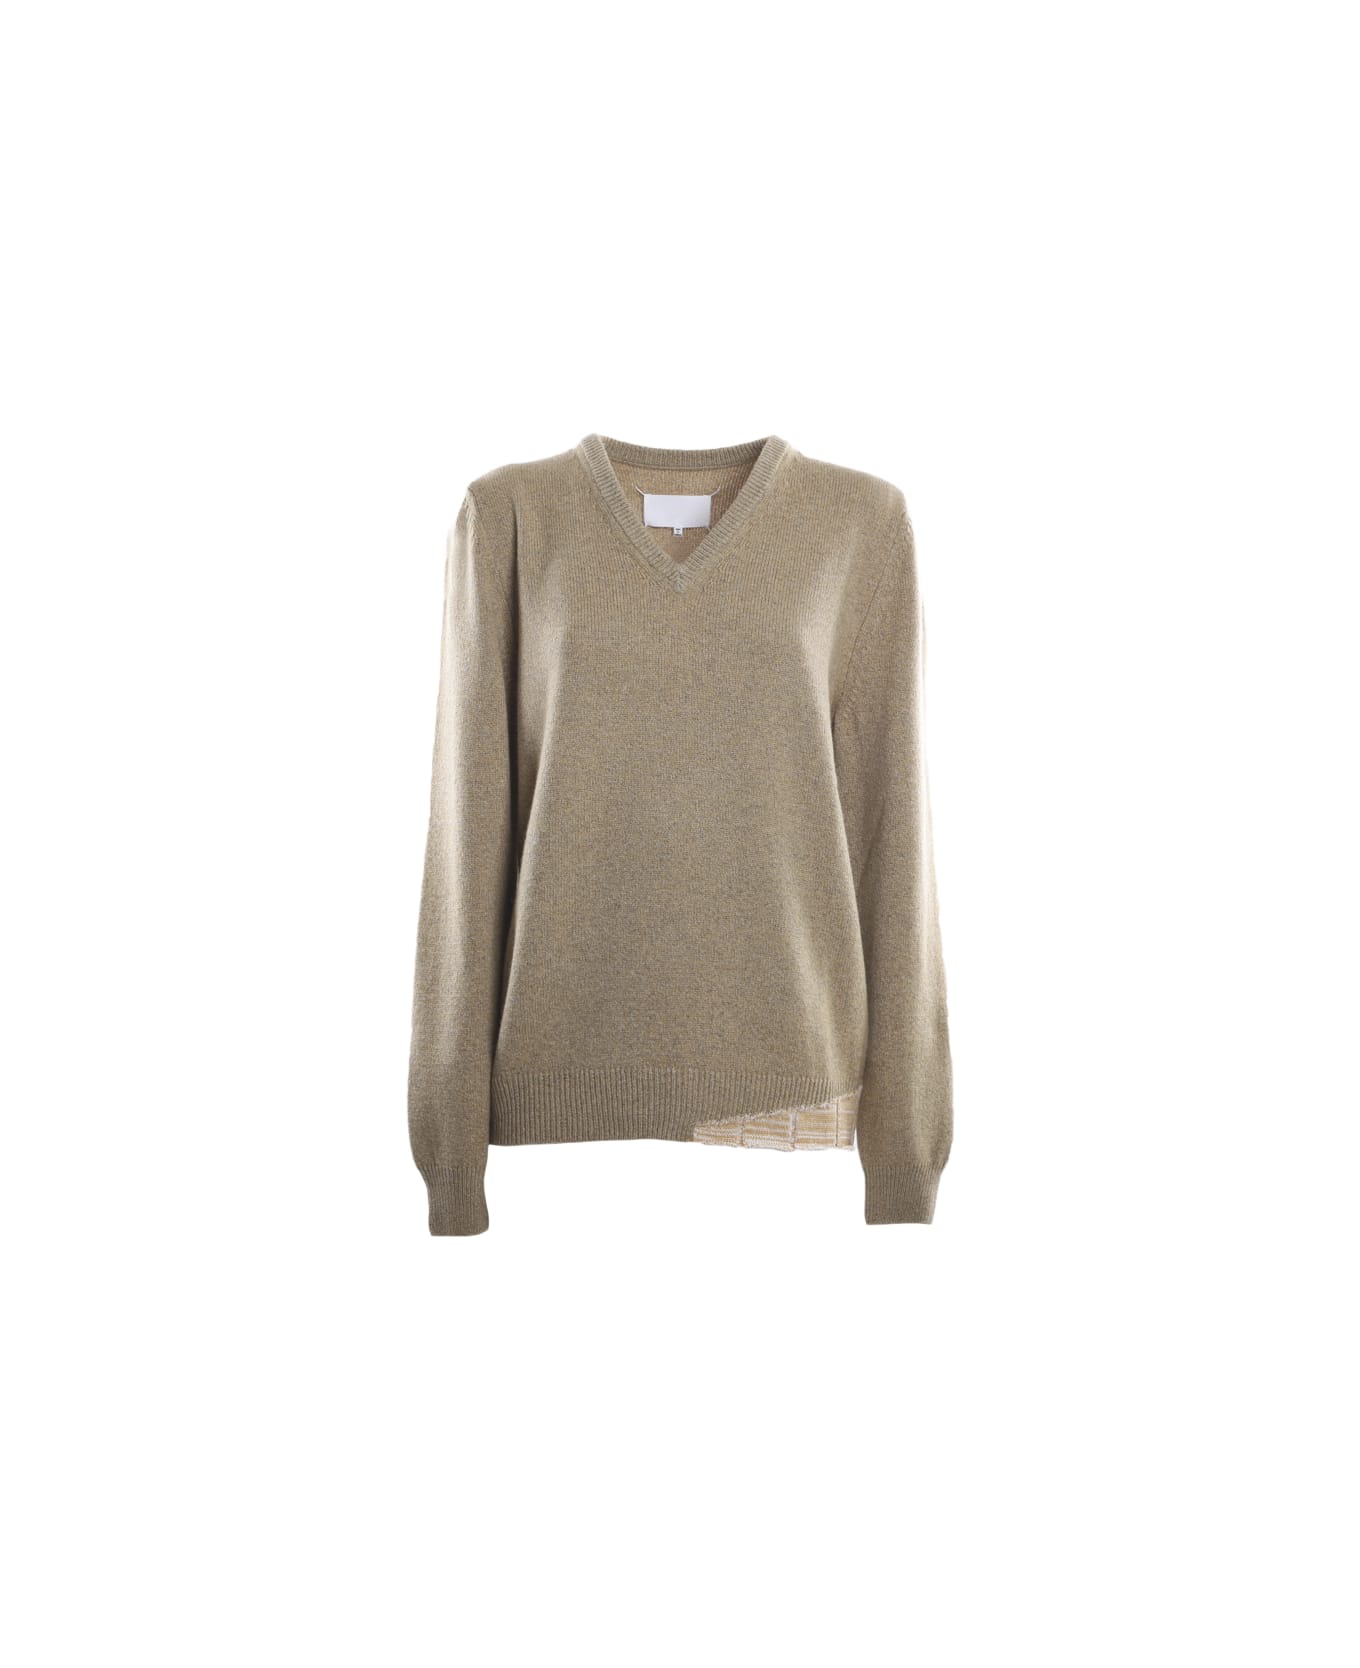 Maison Margiela Wool And Cashmere Sweater With Contrasting Insert - Beige ニットウェア